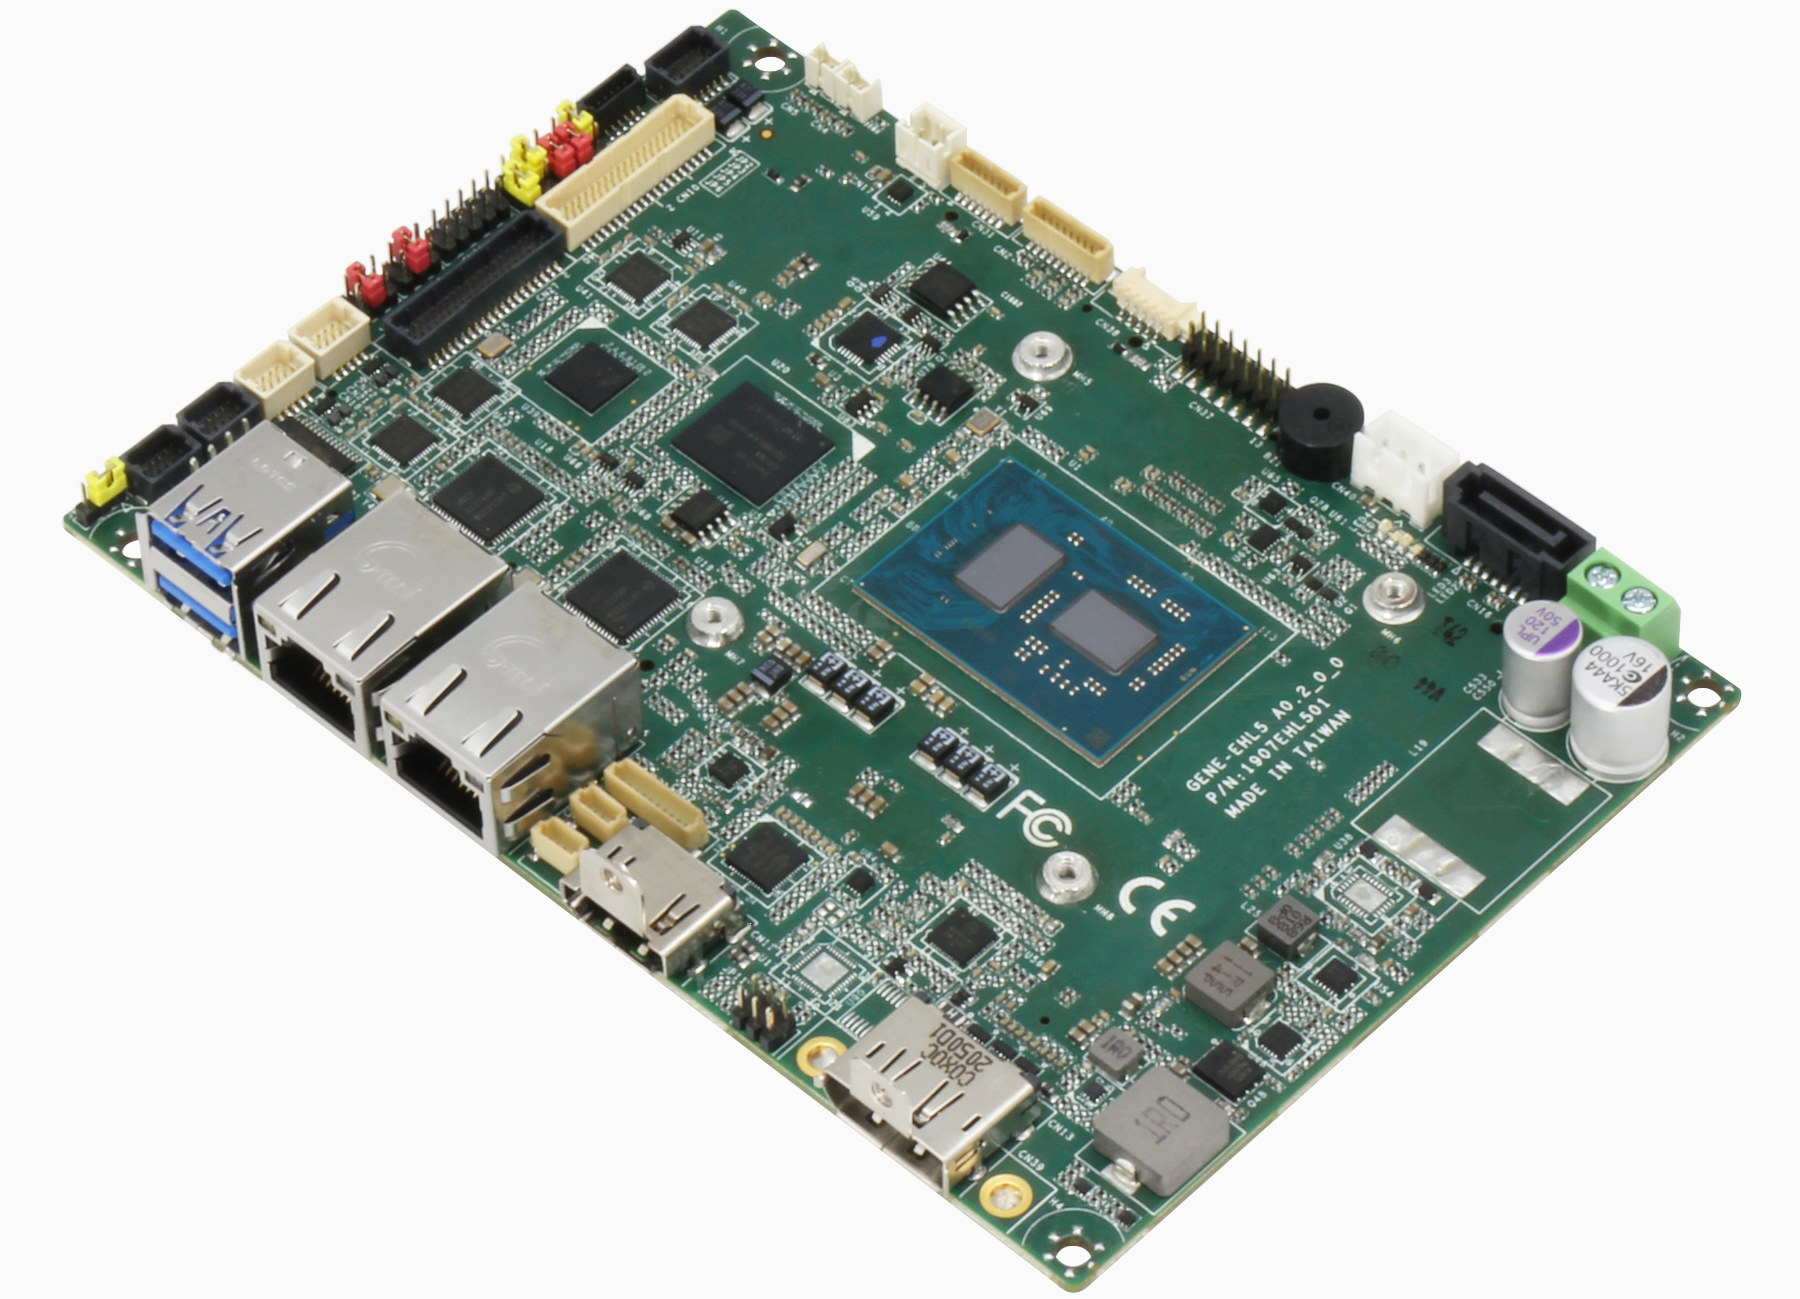 3.5-inch Elkhart Lake SBC offers dual GbE, 4x M.2 sockets, 5G cellular support